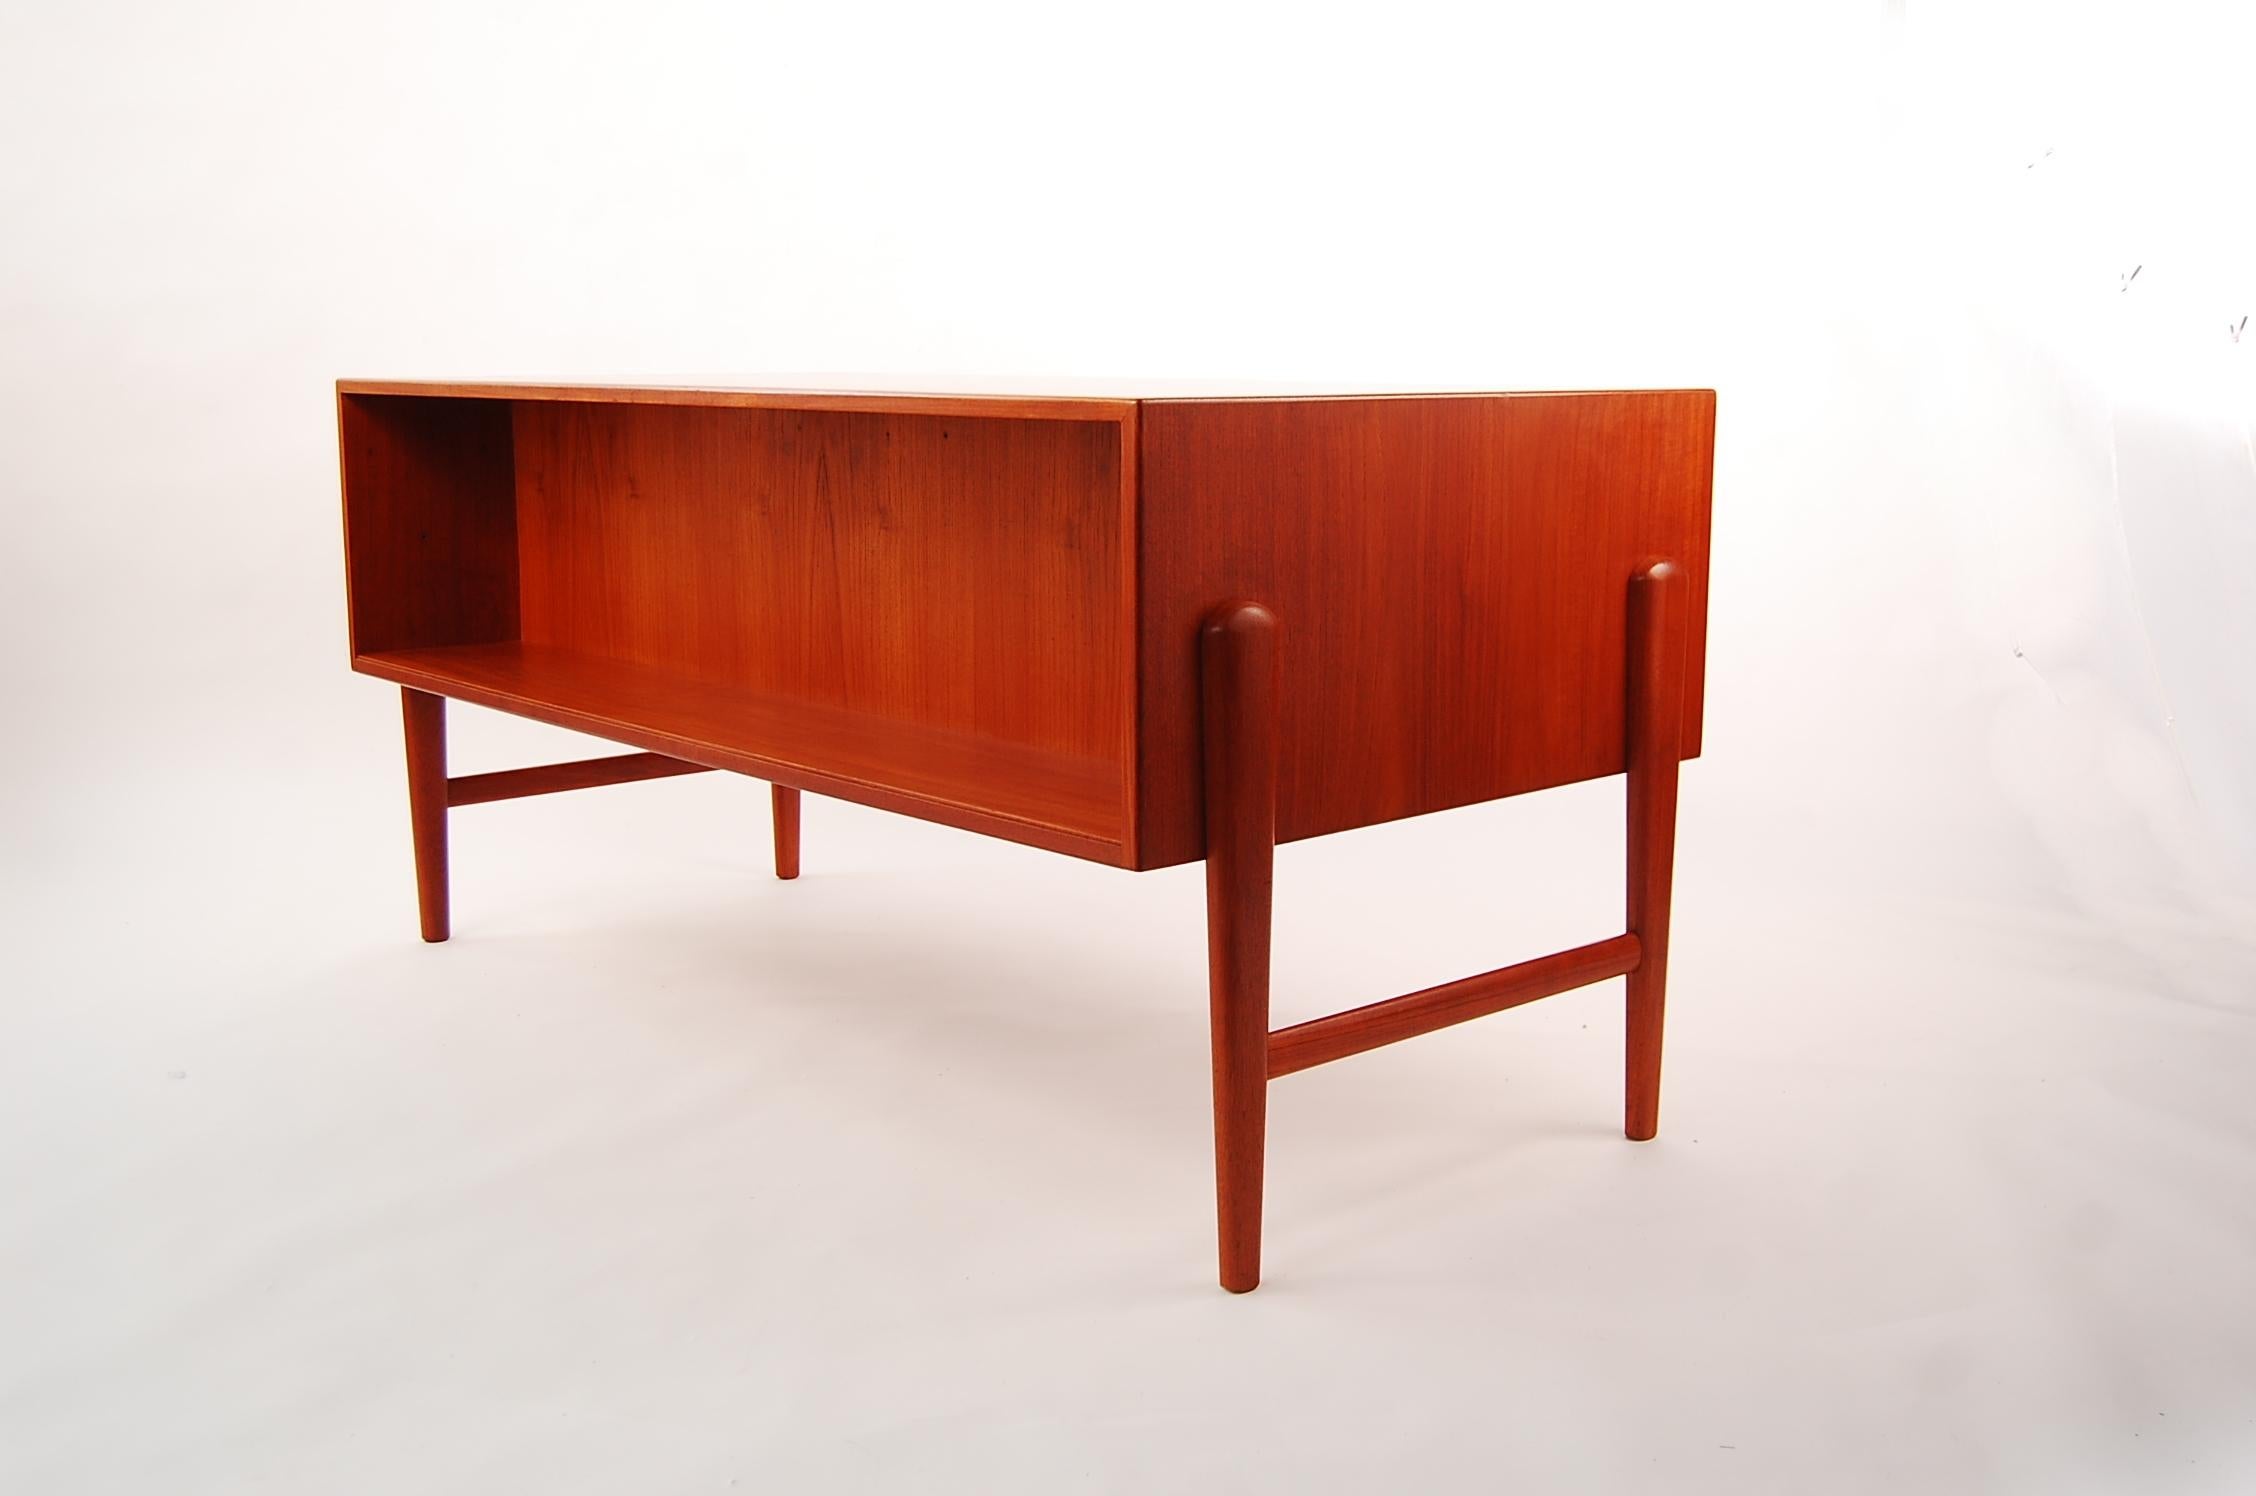 20th Century Danish Modern Desk with Built-In Bookcase Attributed to Arne Vodder